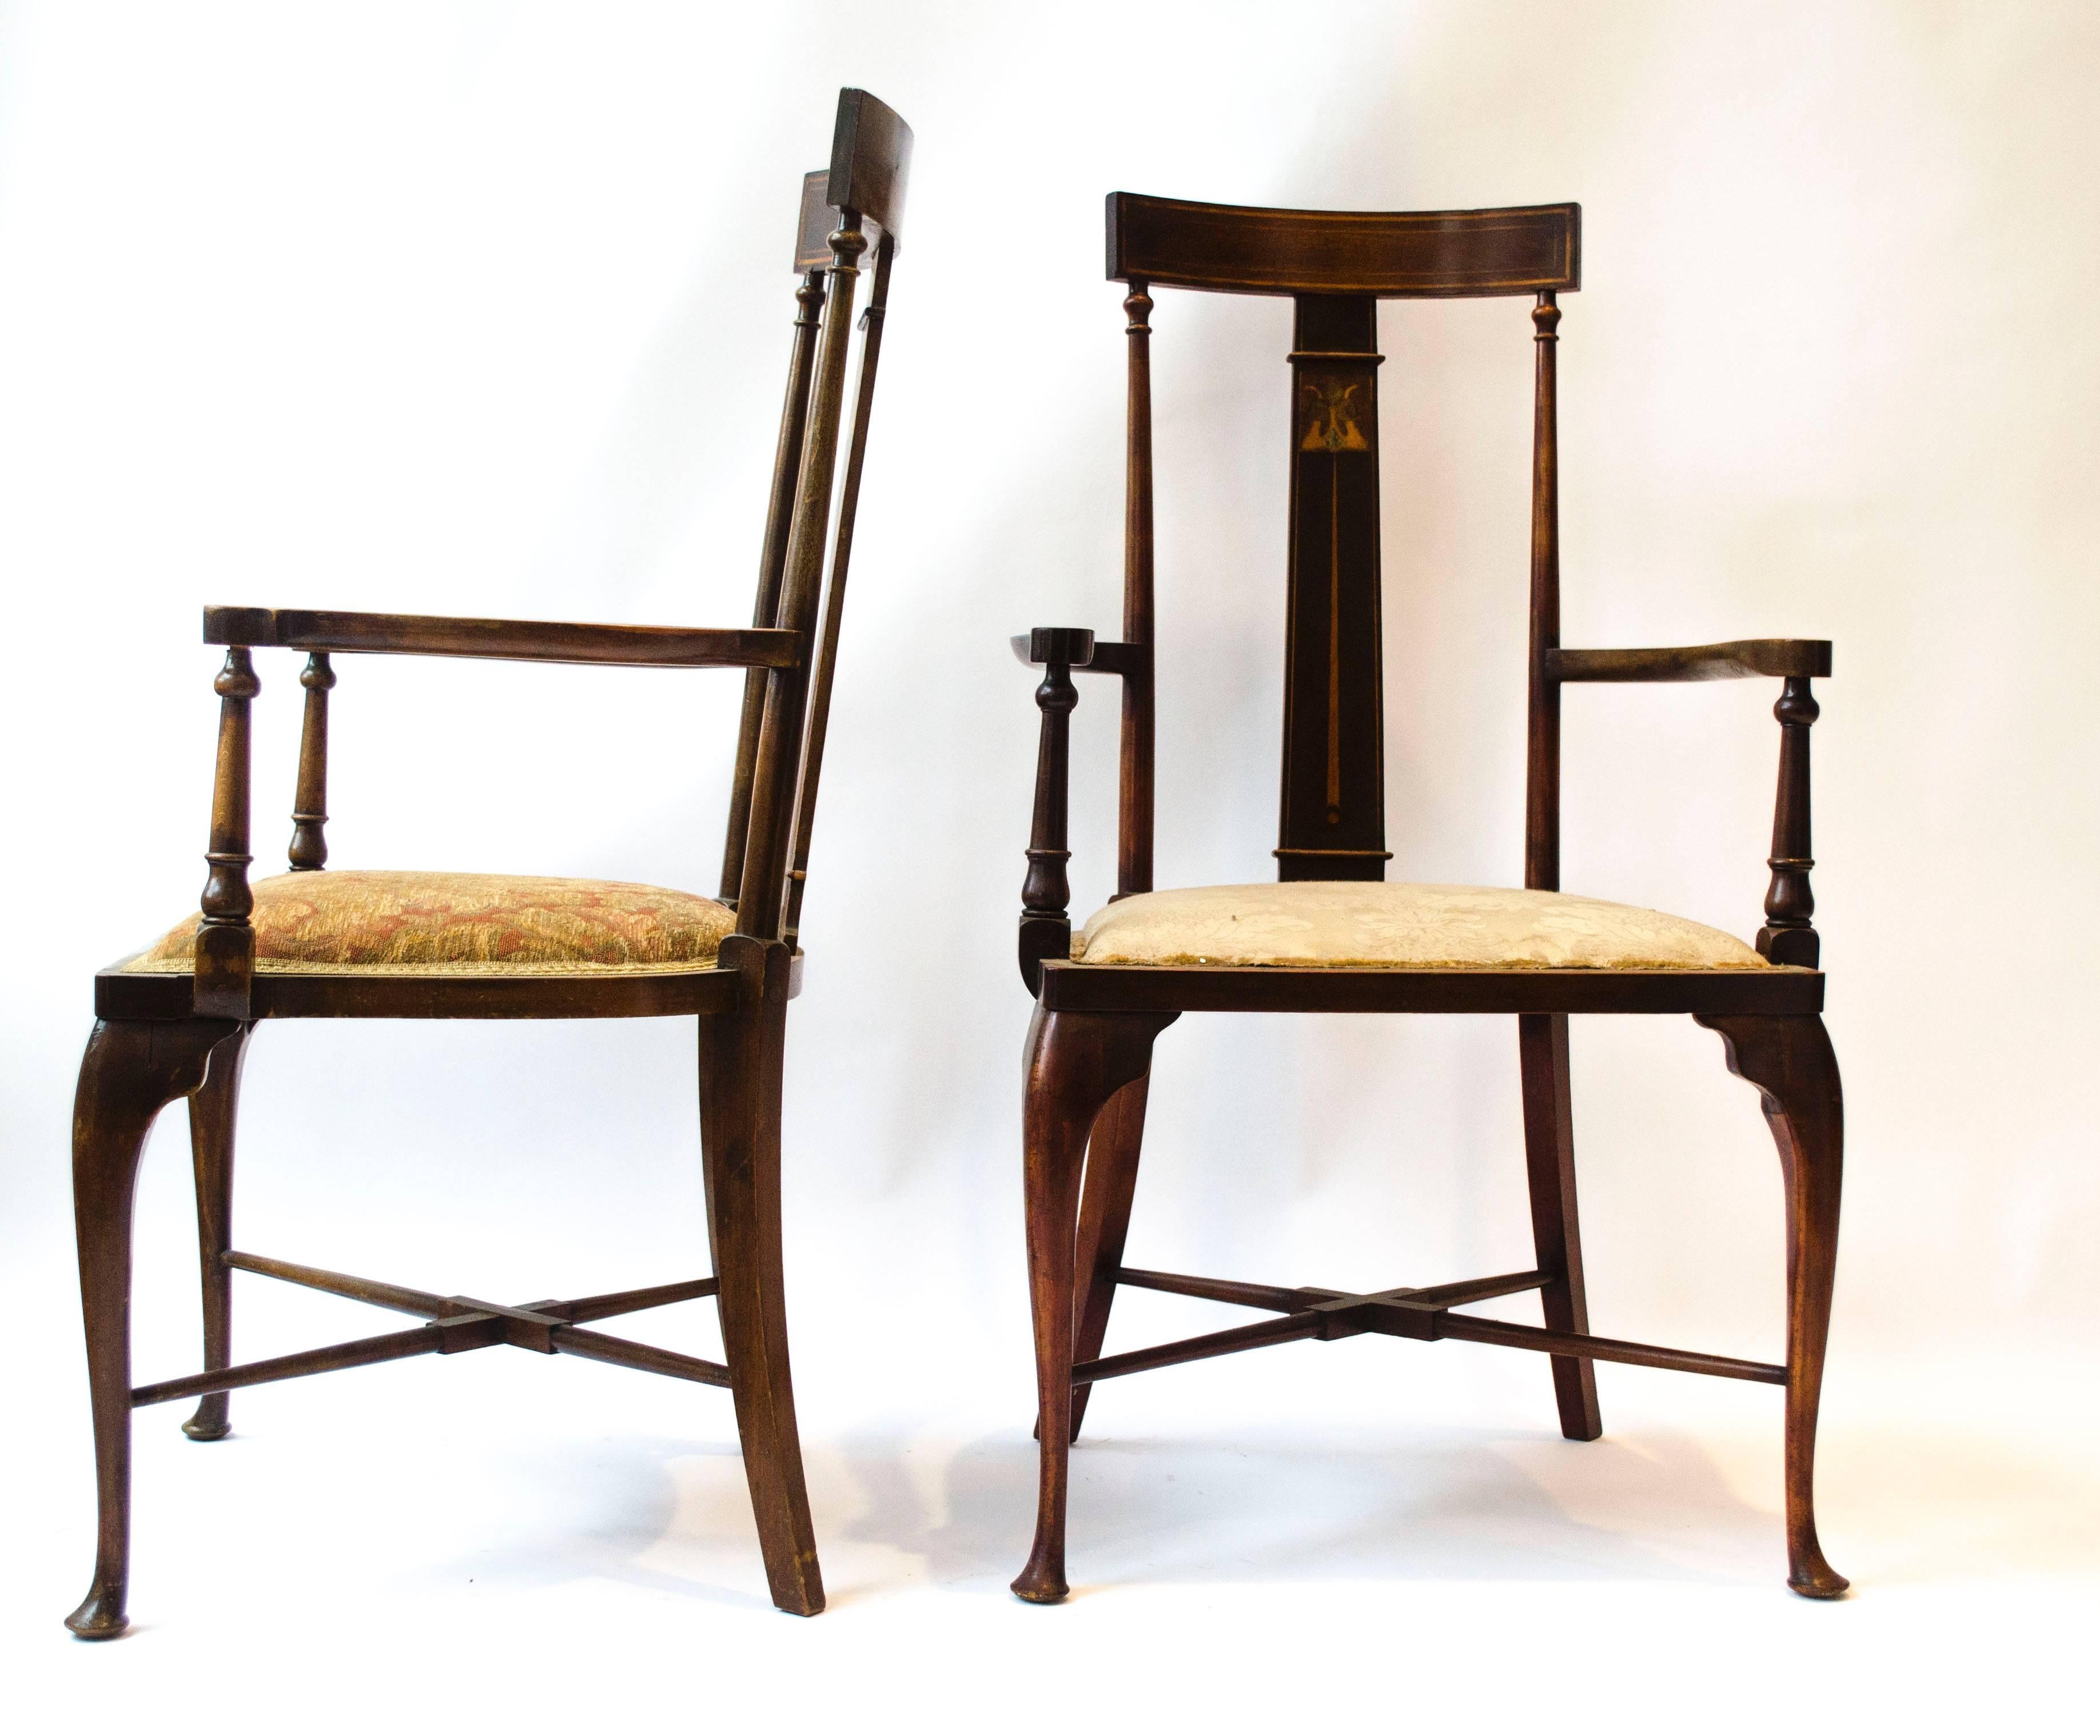 Style of Liberty and Co. Two identical Arts and Crafts mahogany armchairs with stylized floral details to the back inlaid with Abalone, Walnut, Boxwood and Stained Green Sycamore to the back, shaped arm rests and slender Queen Anne style legs united